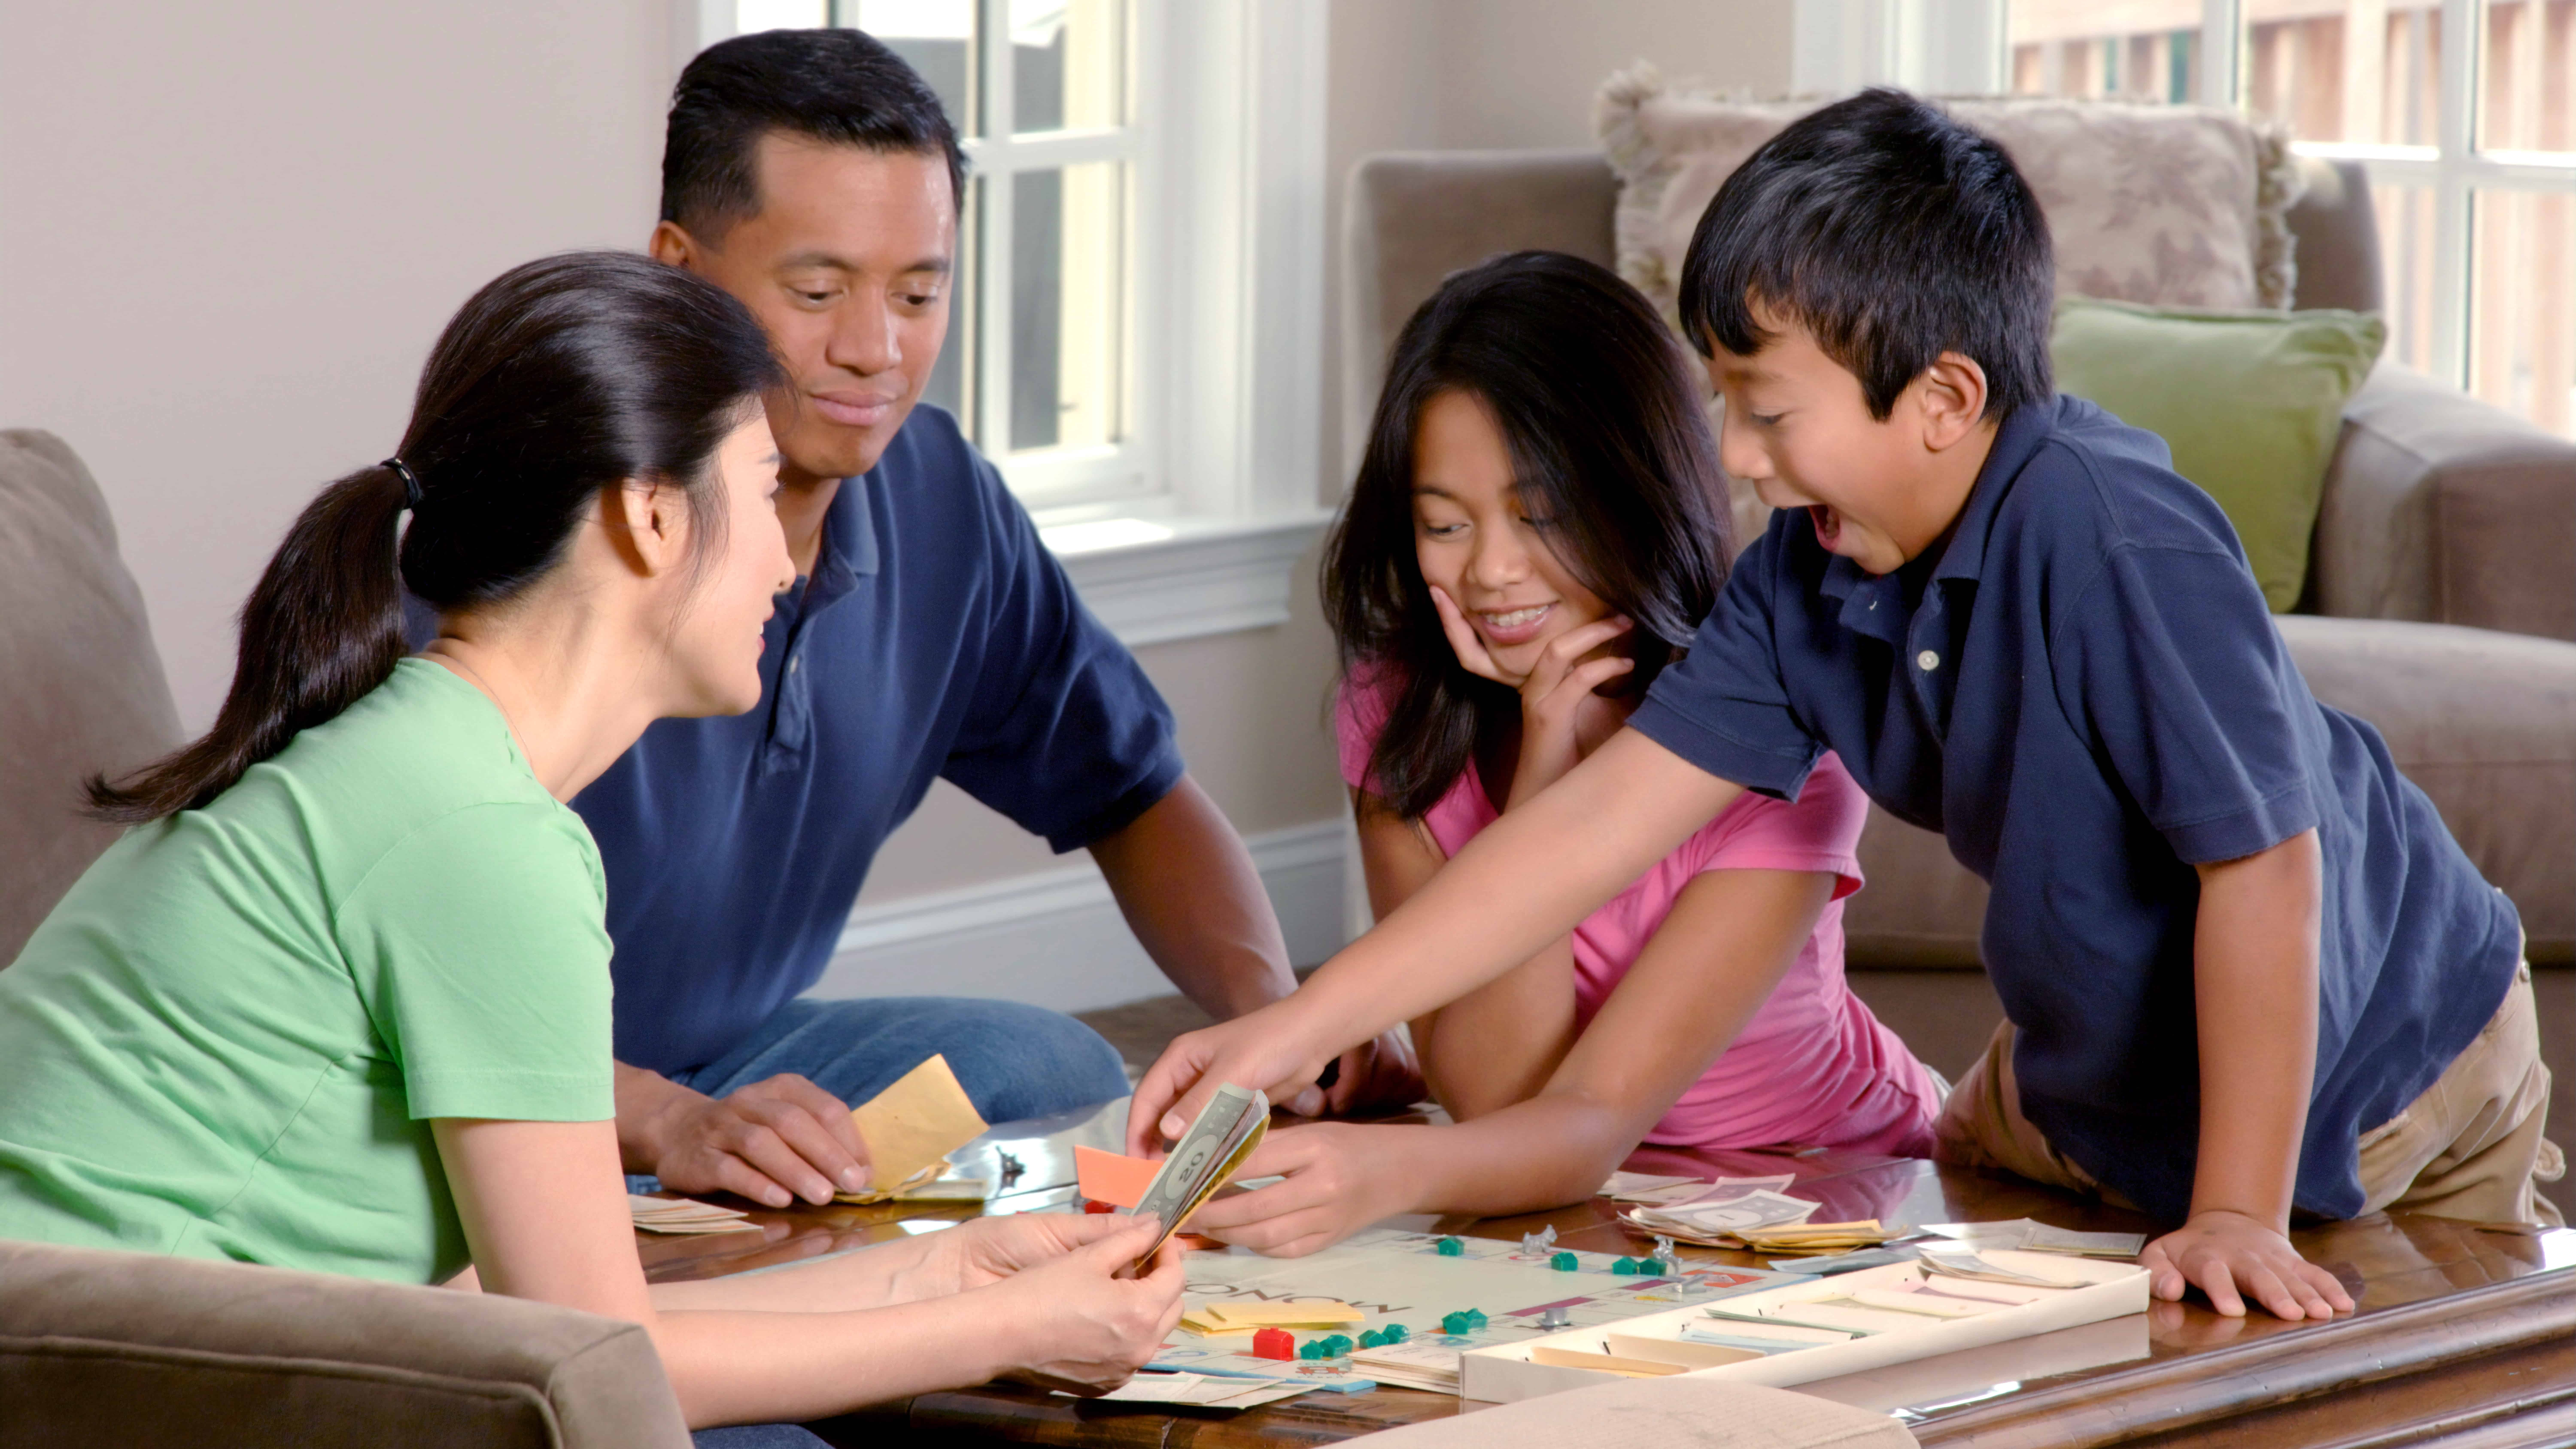 A husband and wife play a board game with their two children.